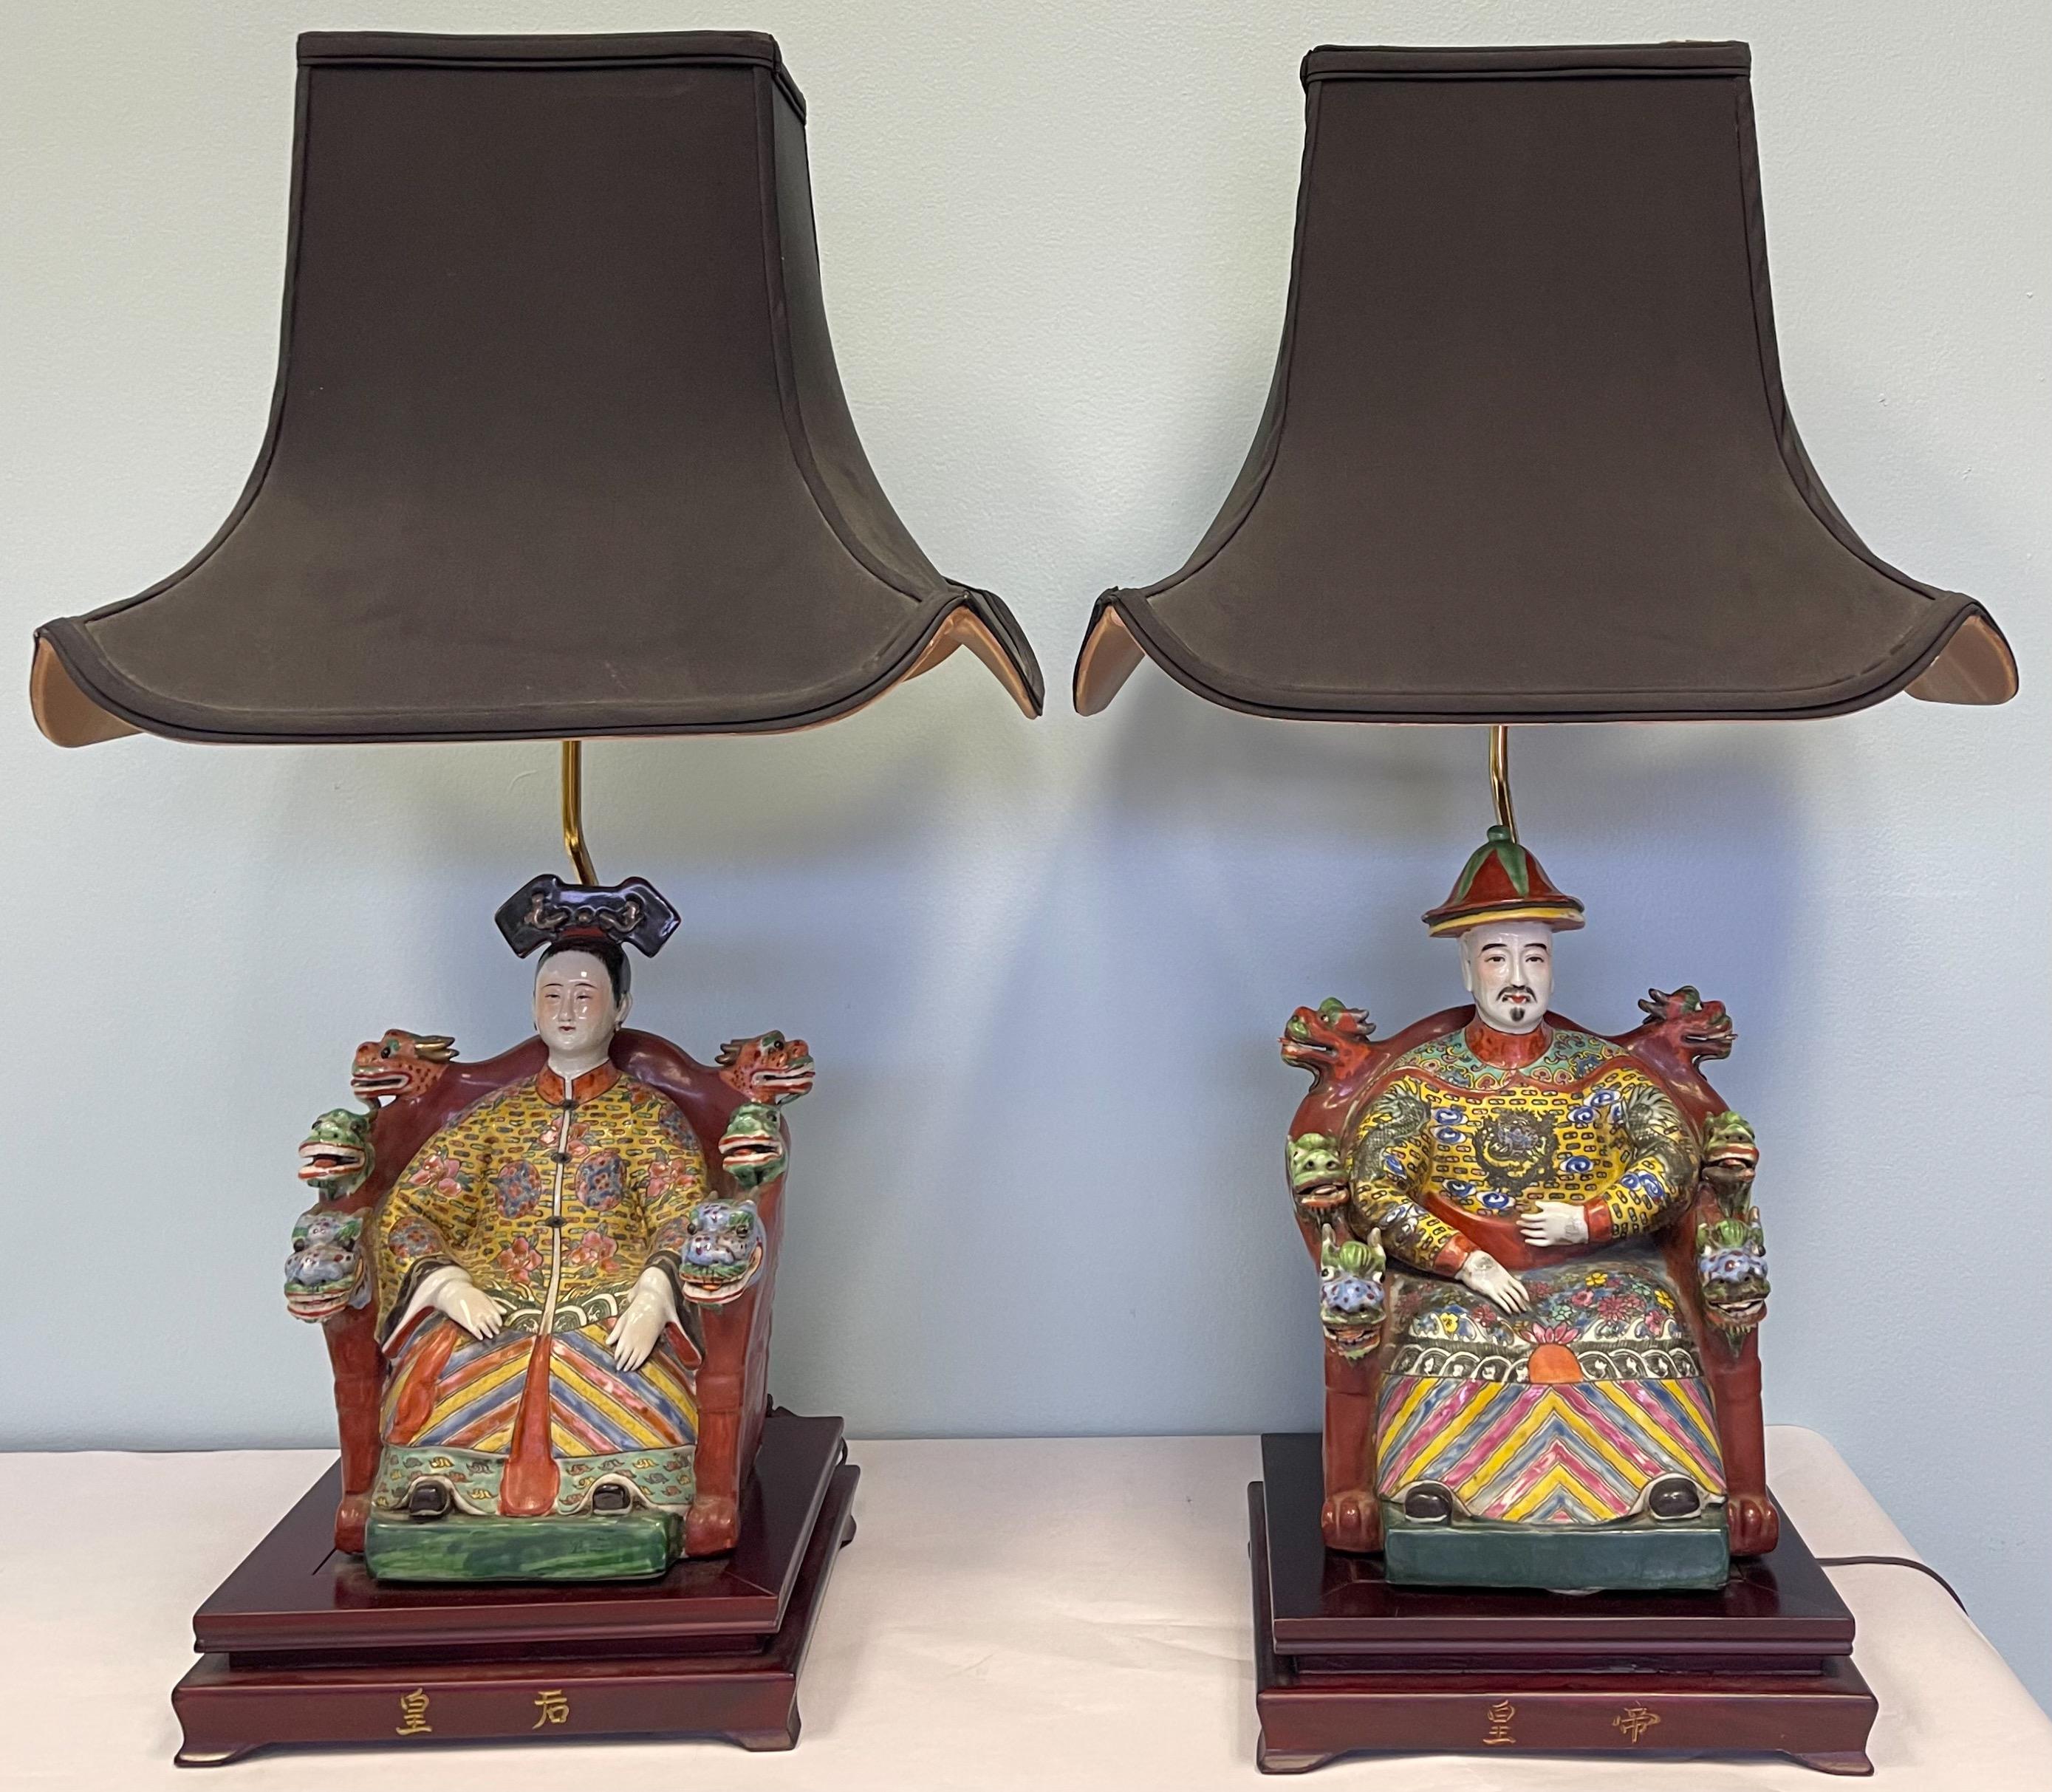 Chinese Export Large Scale Chinoiserie Pottery Lamps with Seated Ancestors and Pagoda Shades